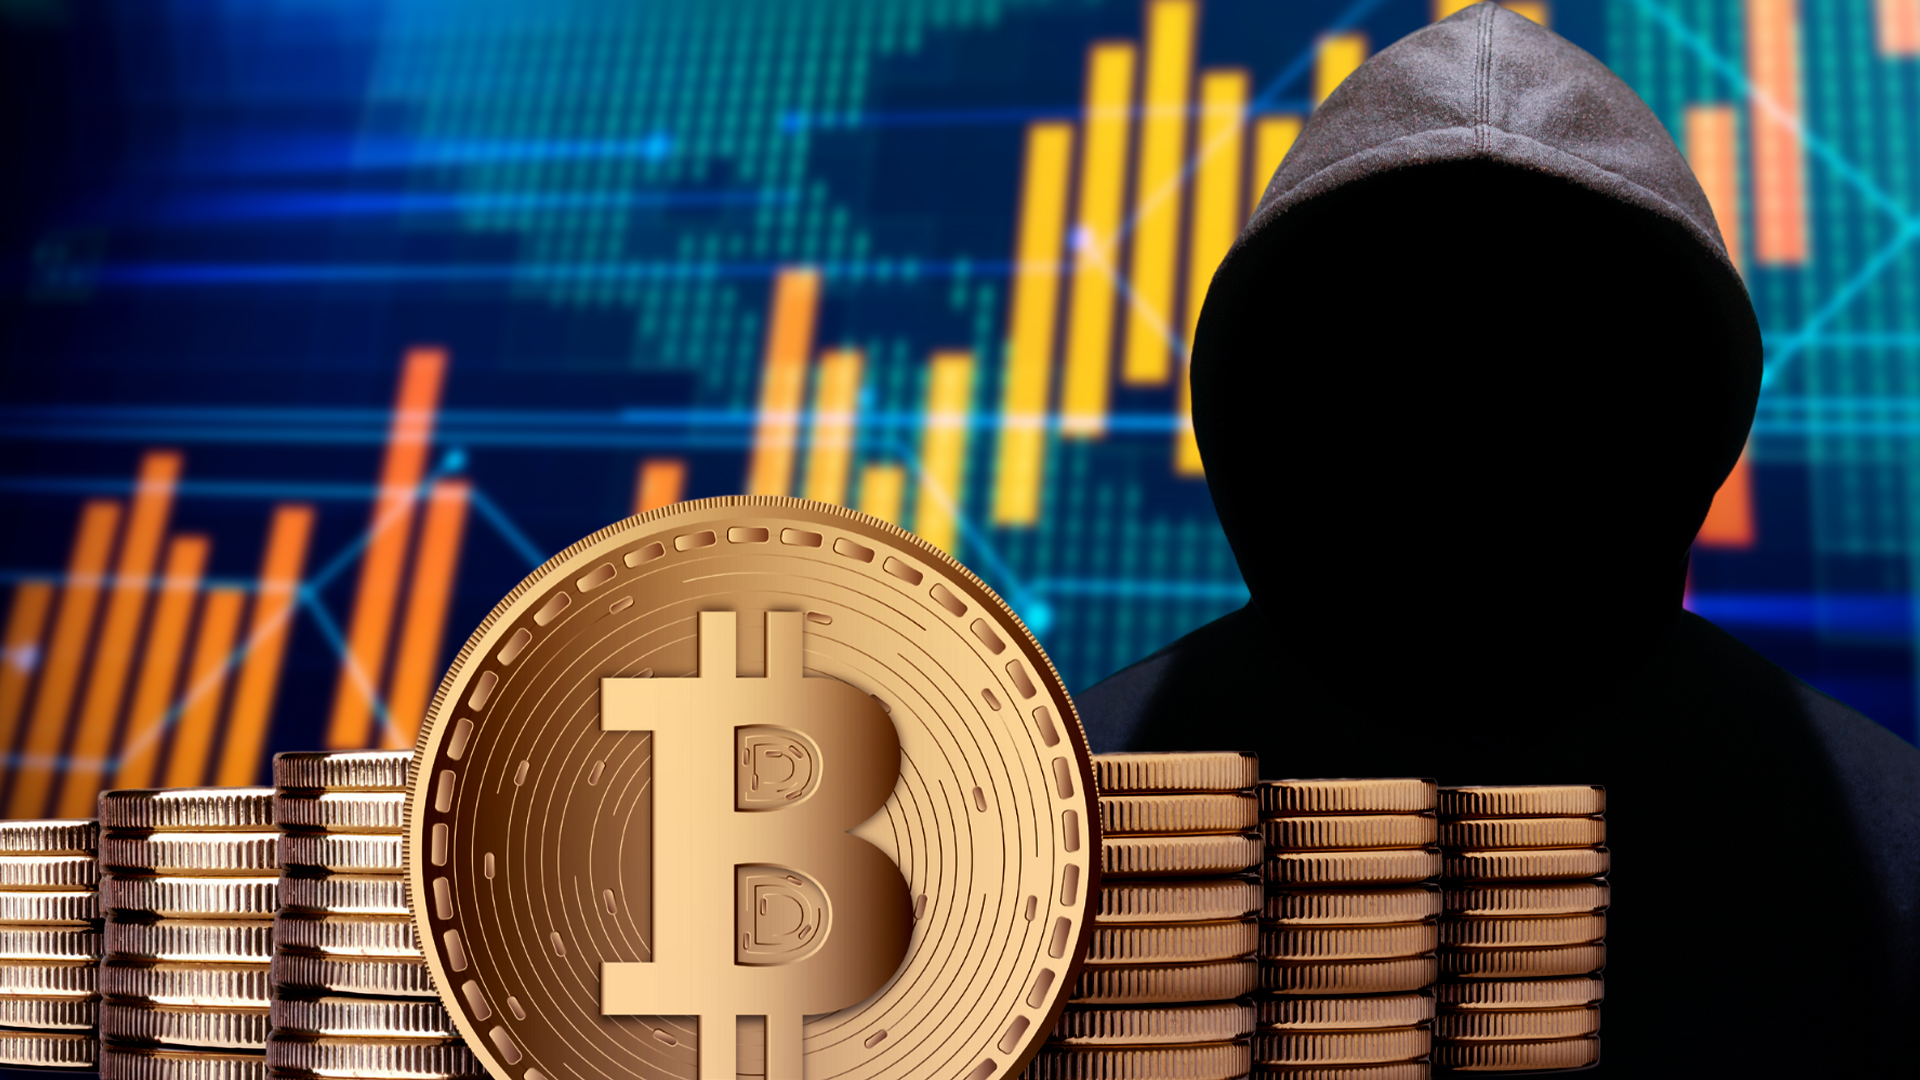 New To Bitcoin? How To Stay Safe And Avoid Common Bitcoin Scams